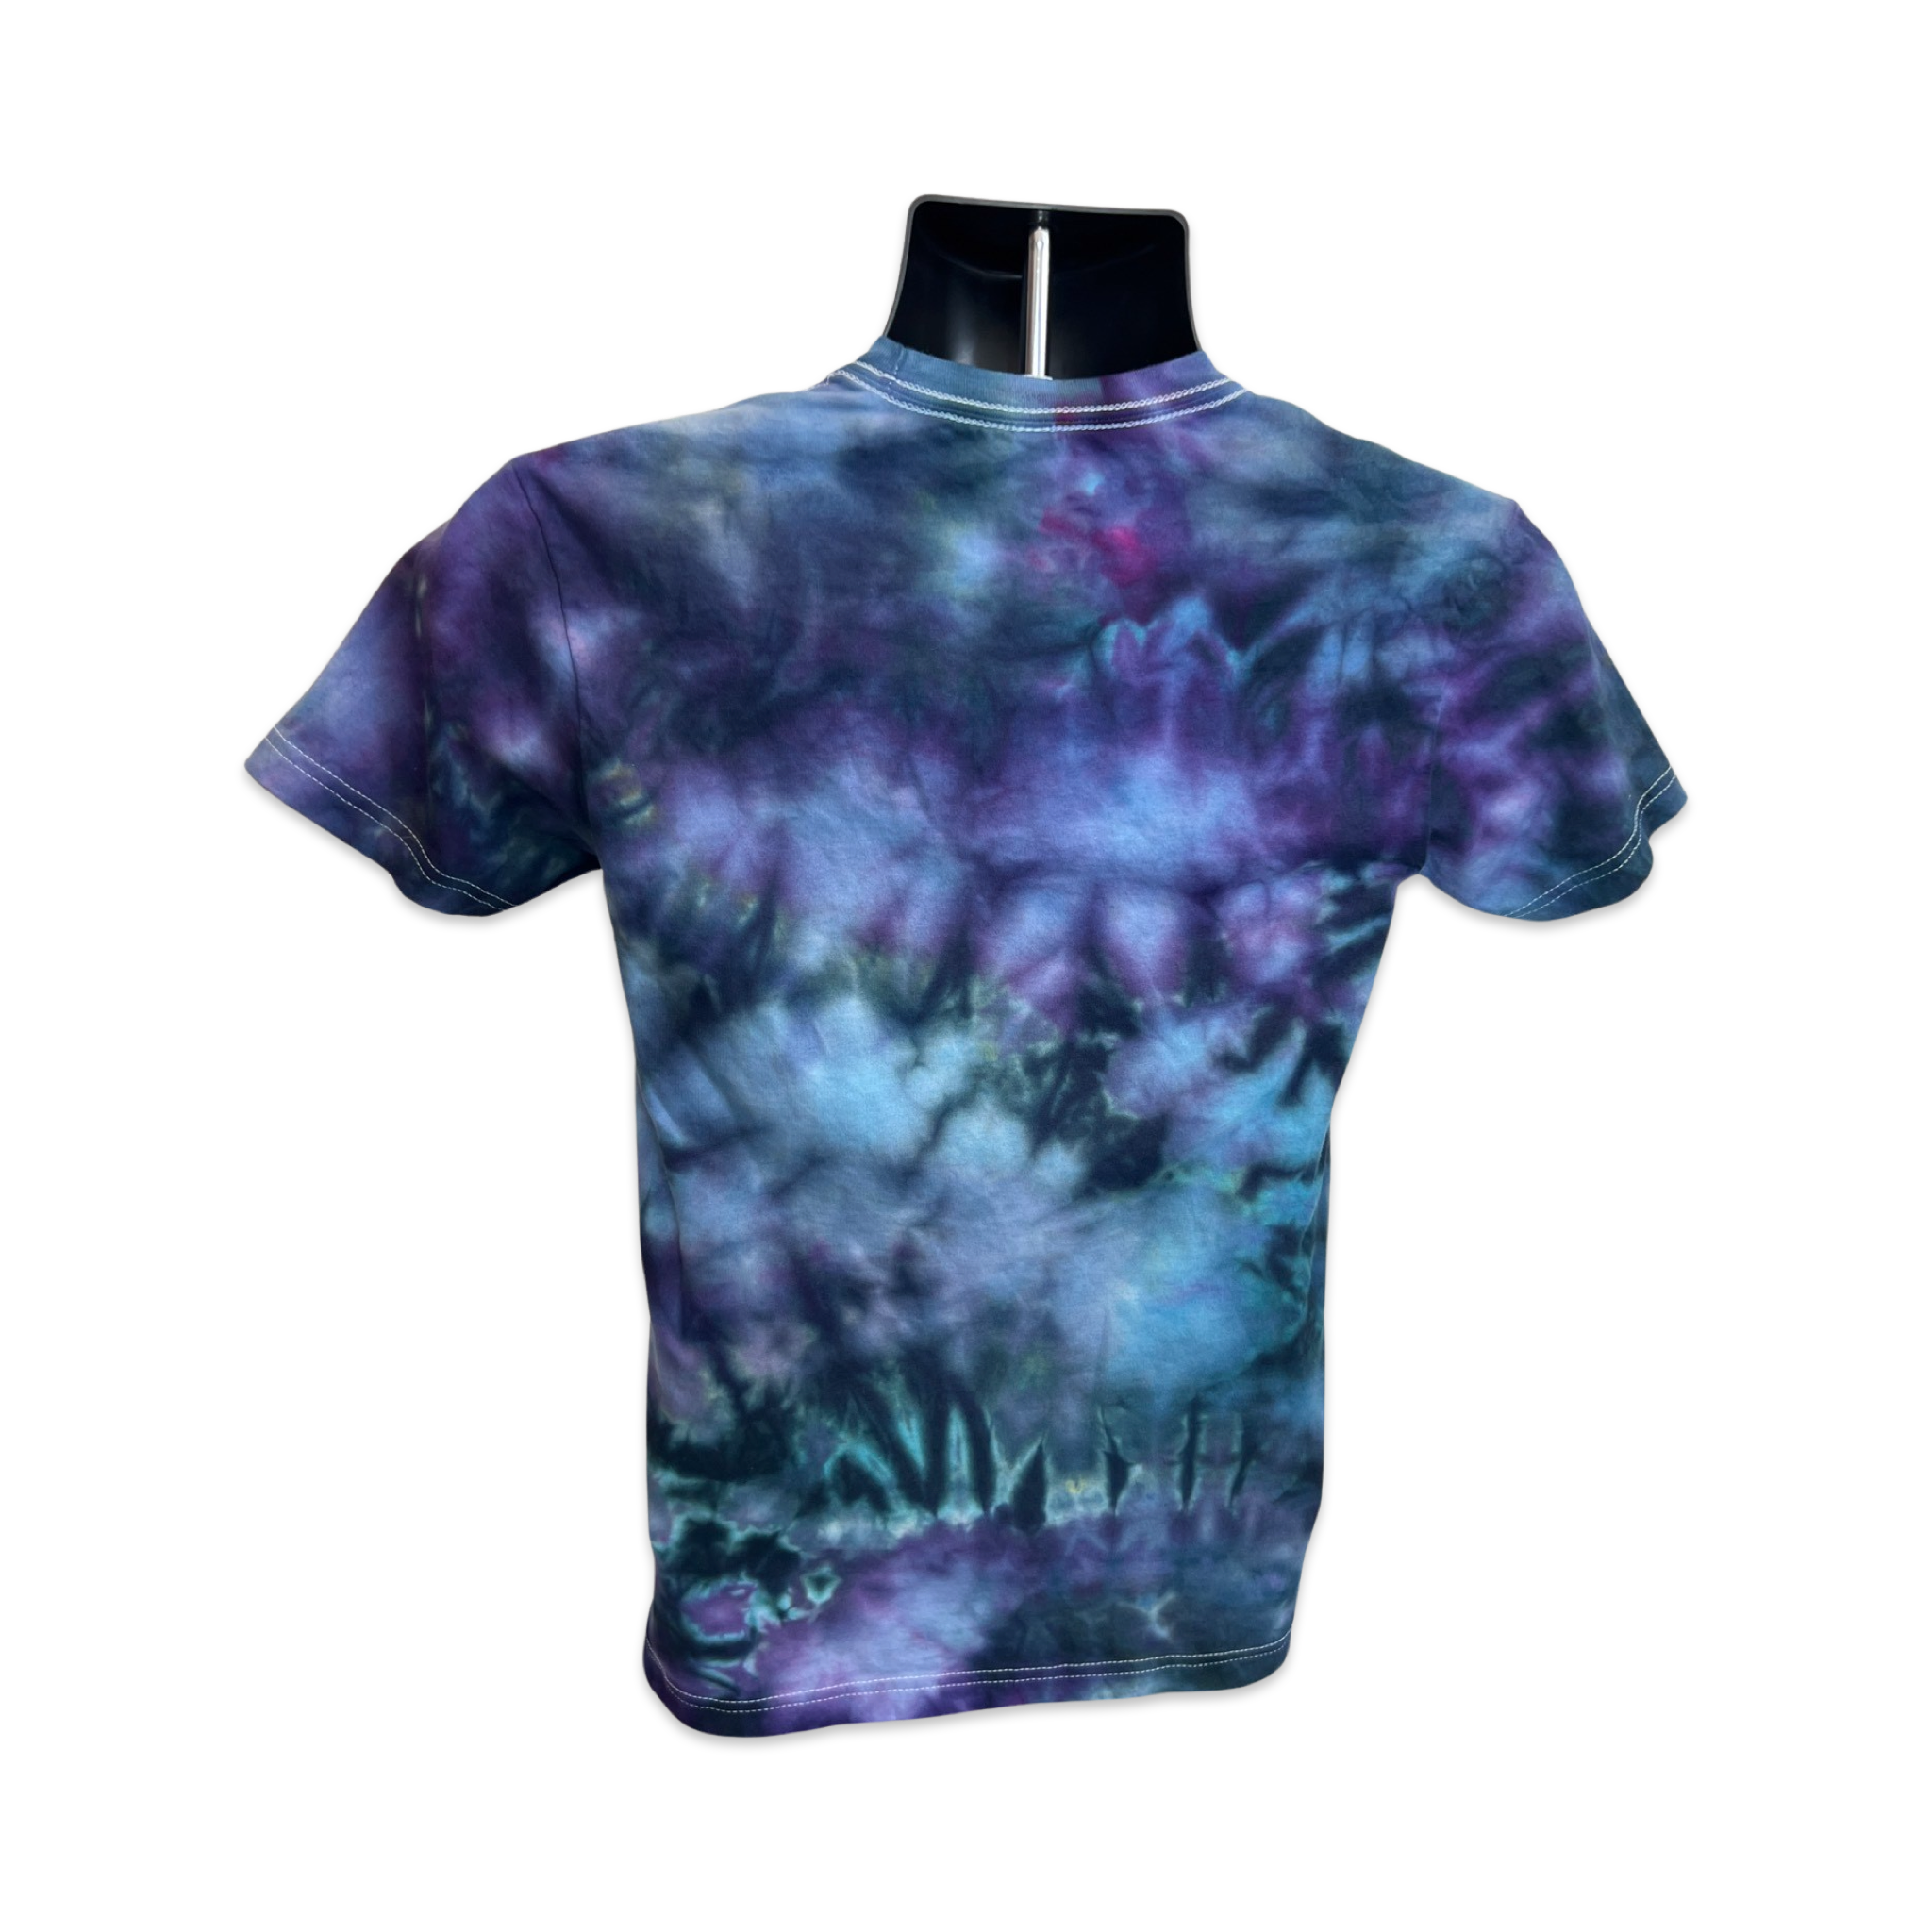 Moon Recharge purple & black Tie-Dye Unisex T-shirt - Infused with Moo ...